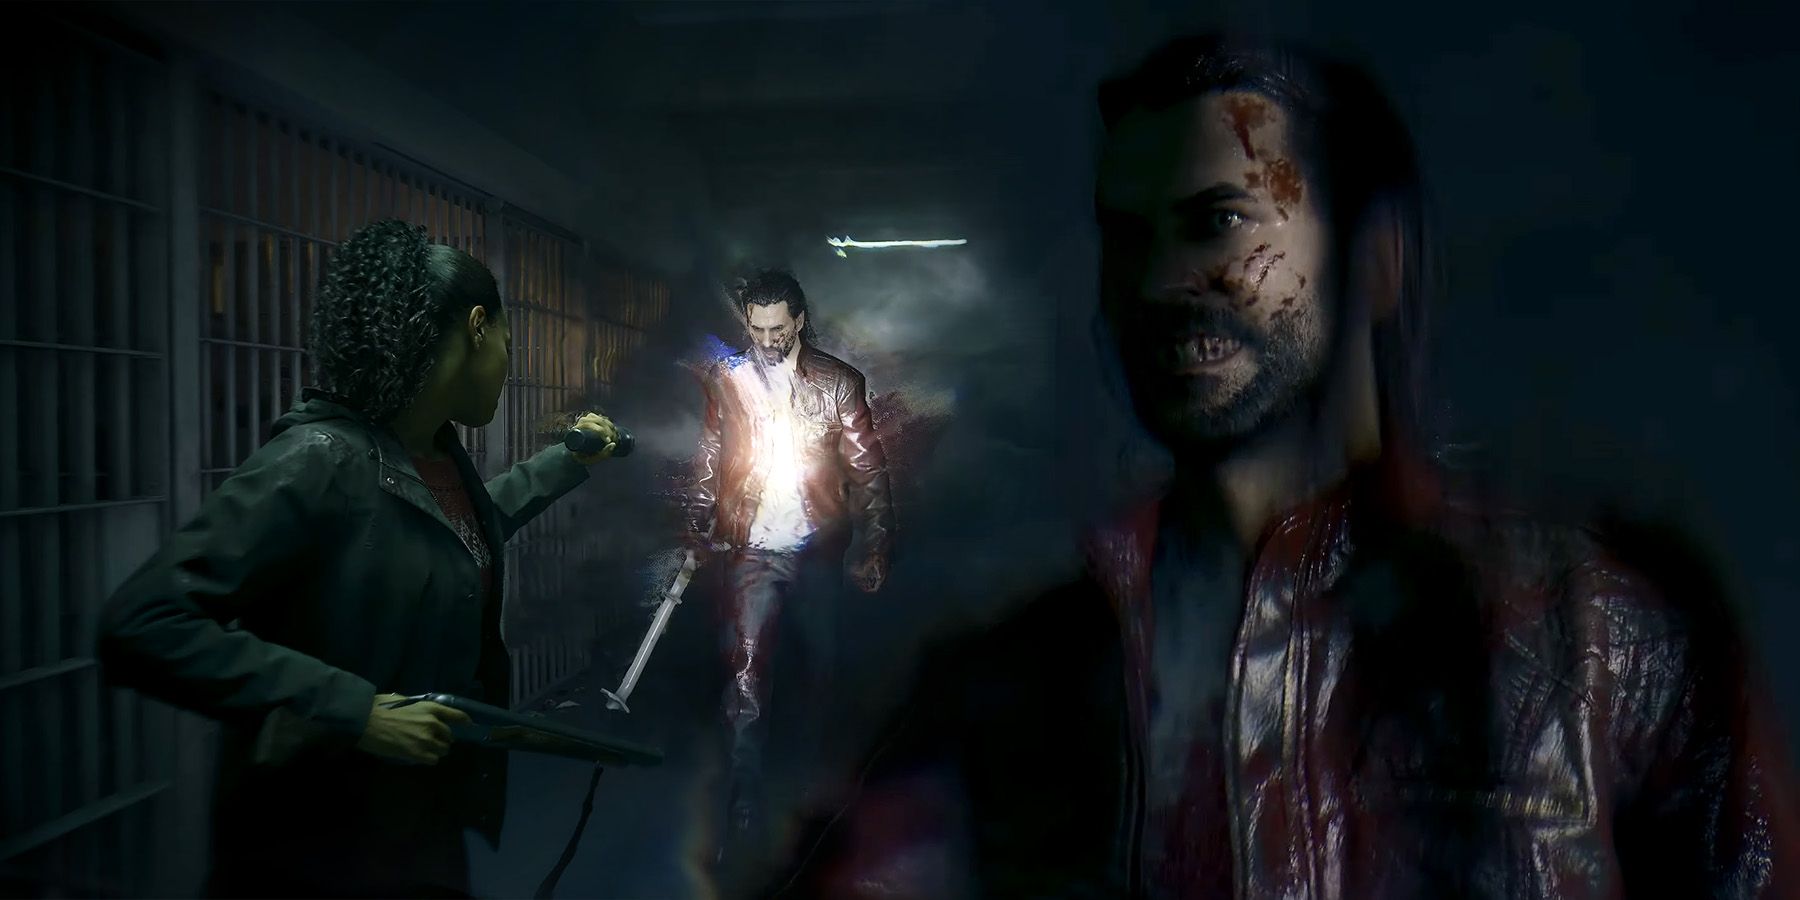 Alan Wake 2 - How to Survive the Summoning and Beat the Final Boss